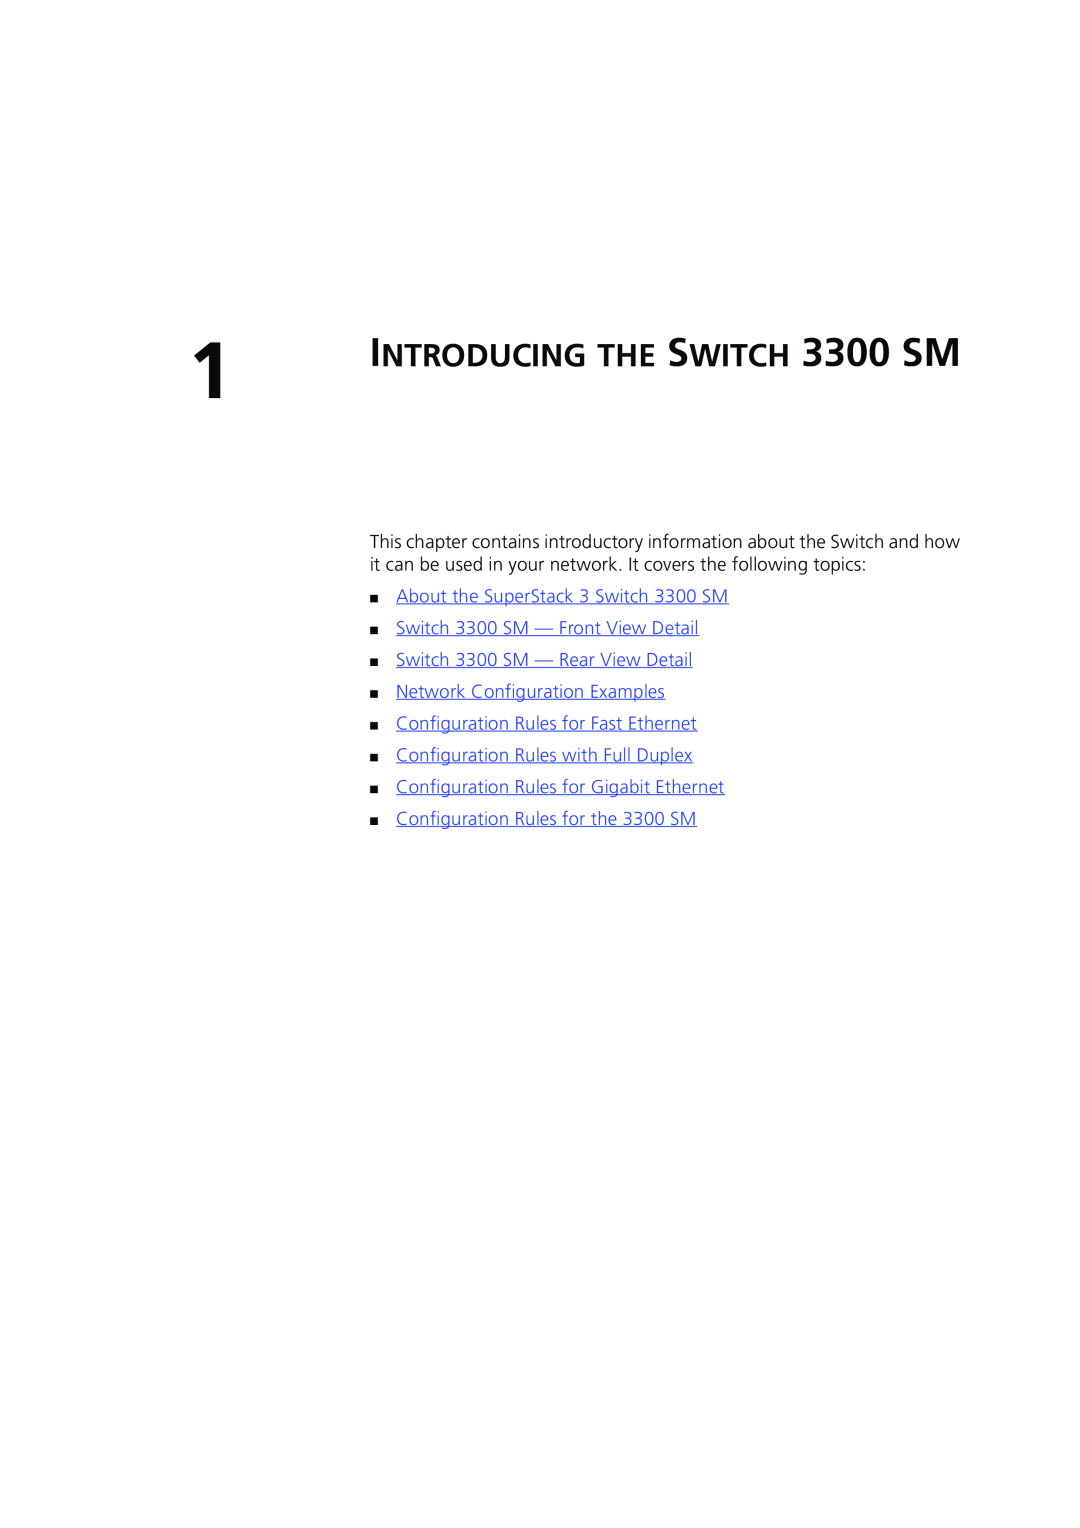 3Com 3C16987A manual INTRODUCING THE SWITCH 3300 SM 